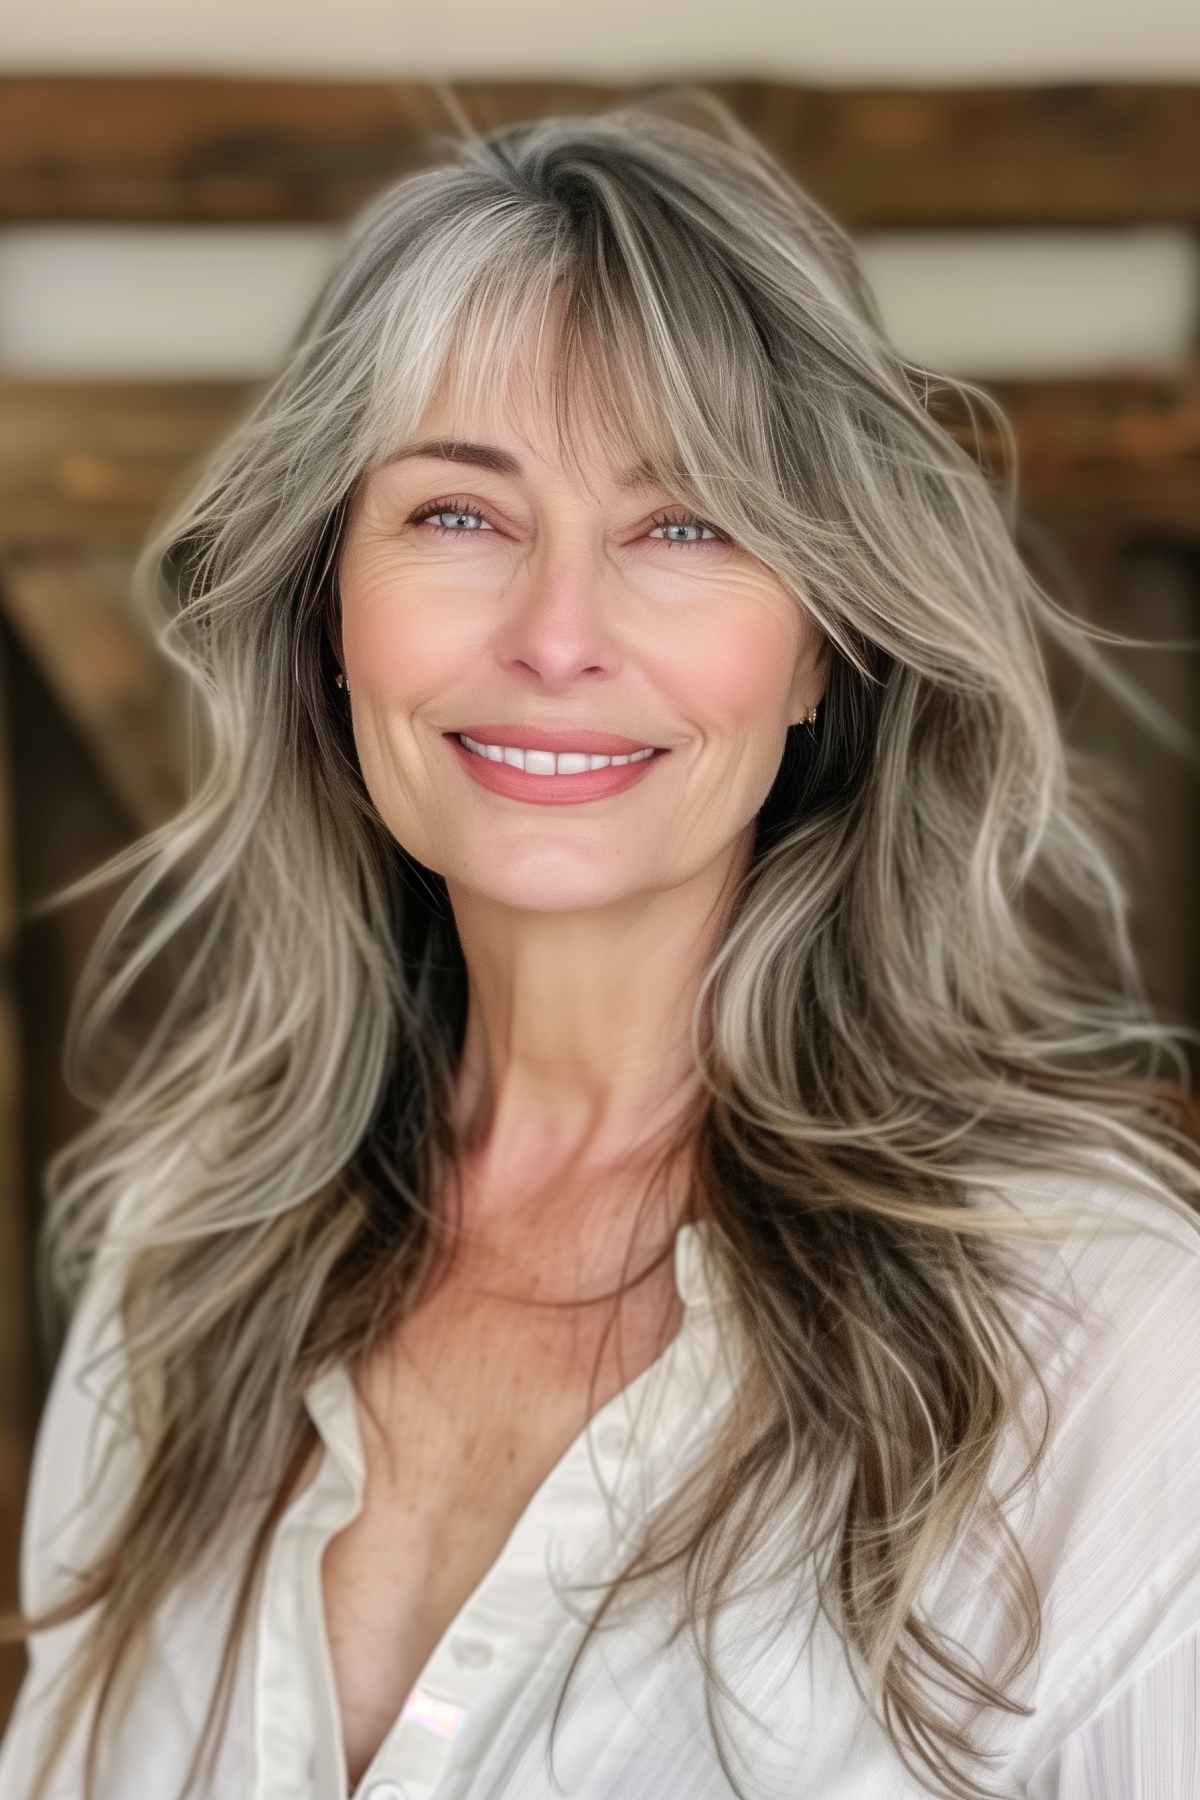 Mature woman with long gray hair and feathered bangs, wearing a white blouse.